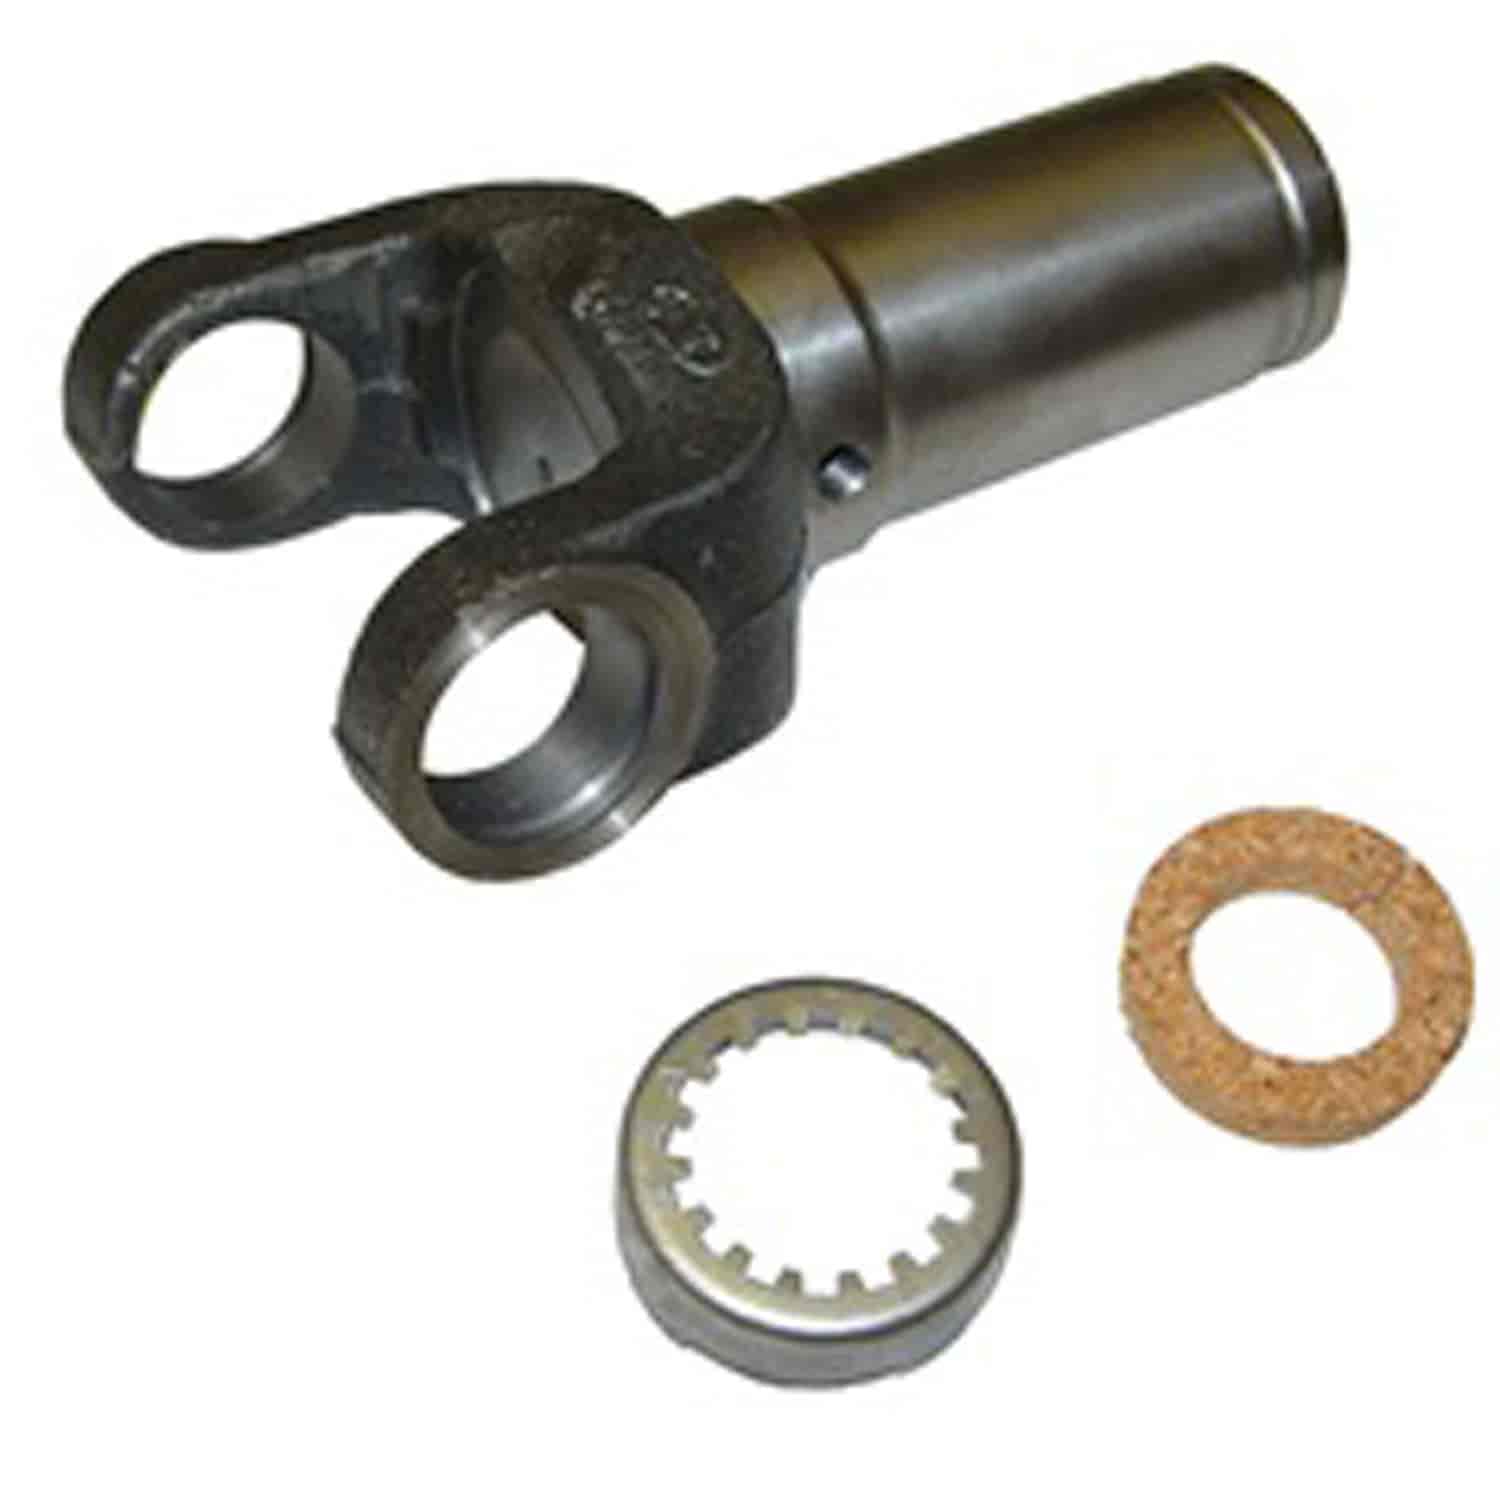 This driveshaft slip yoke from Omix-ADA fits 41-66 Willys and Jeep models. Fits front or rear two required per vehicle.